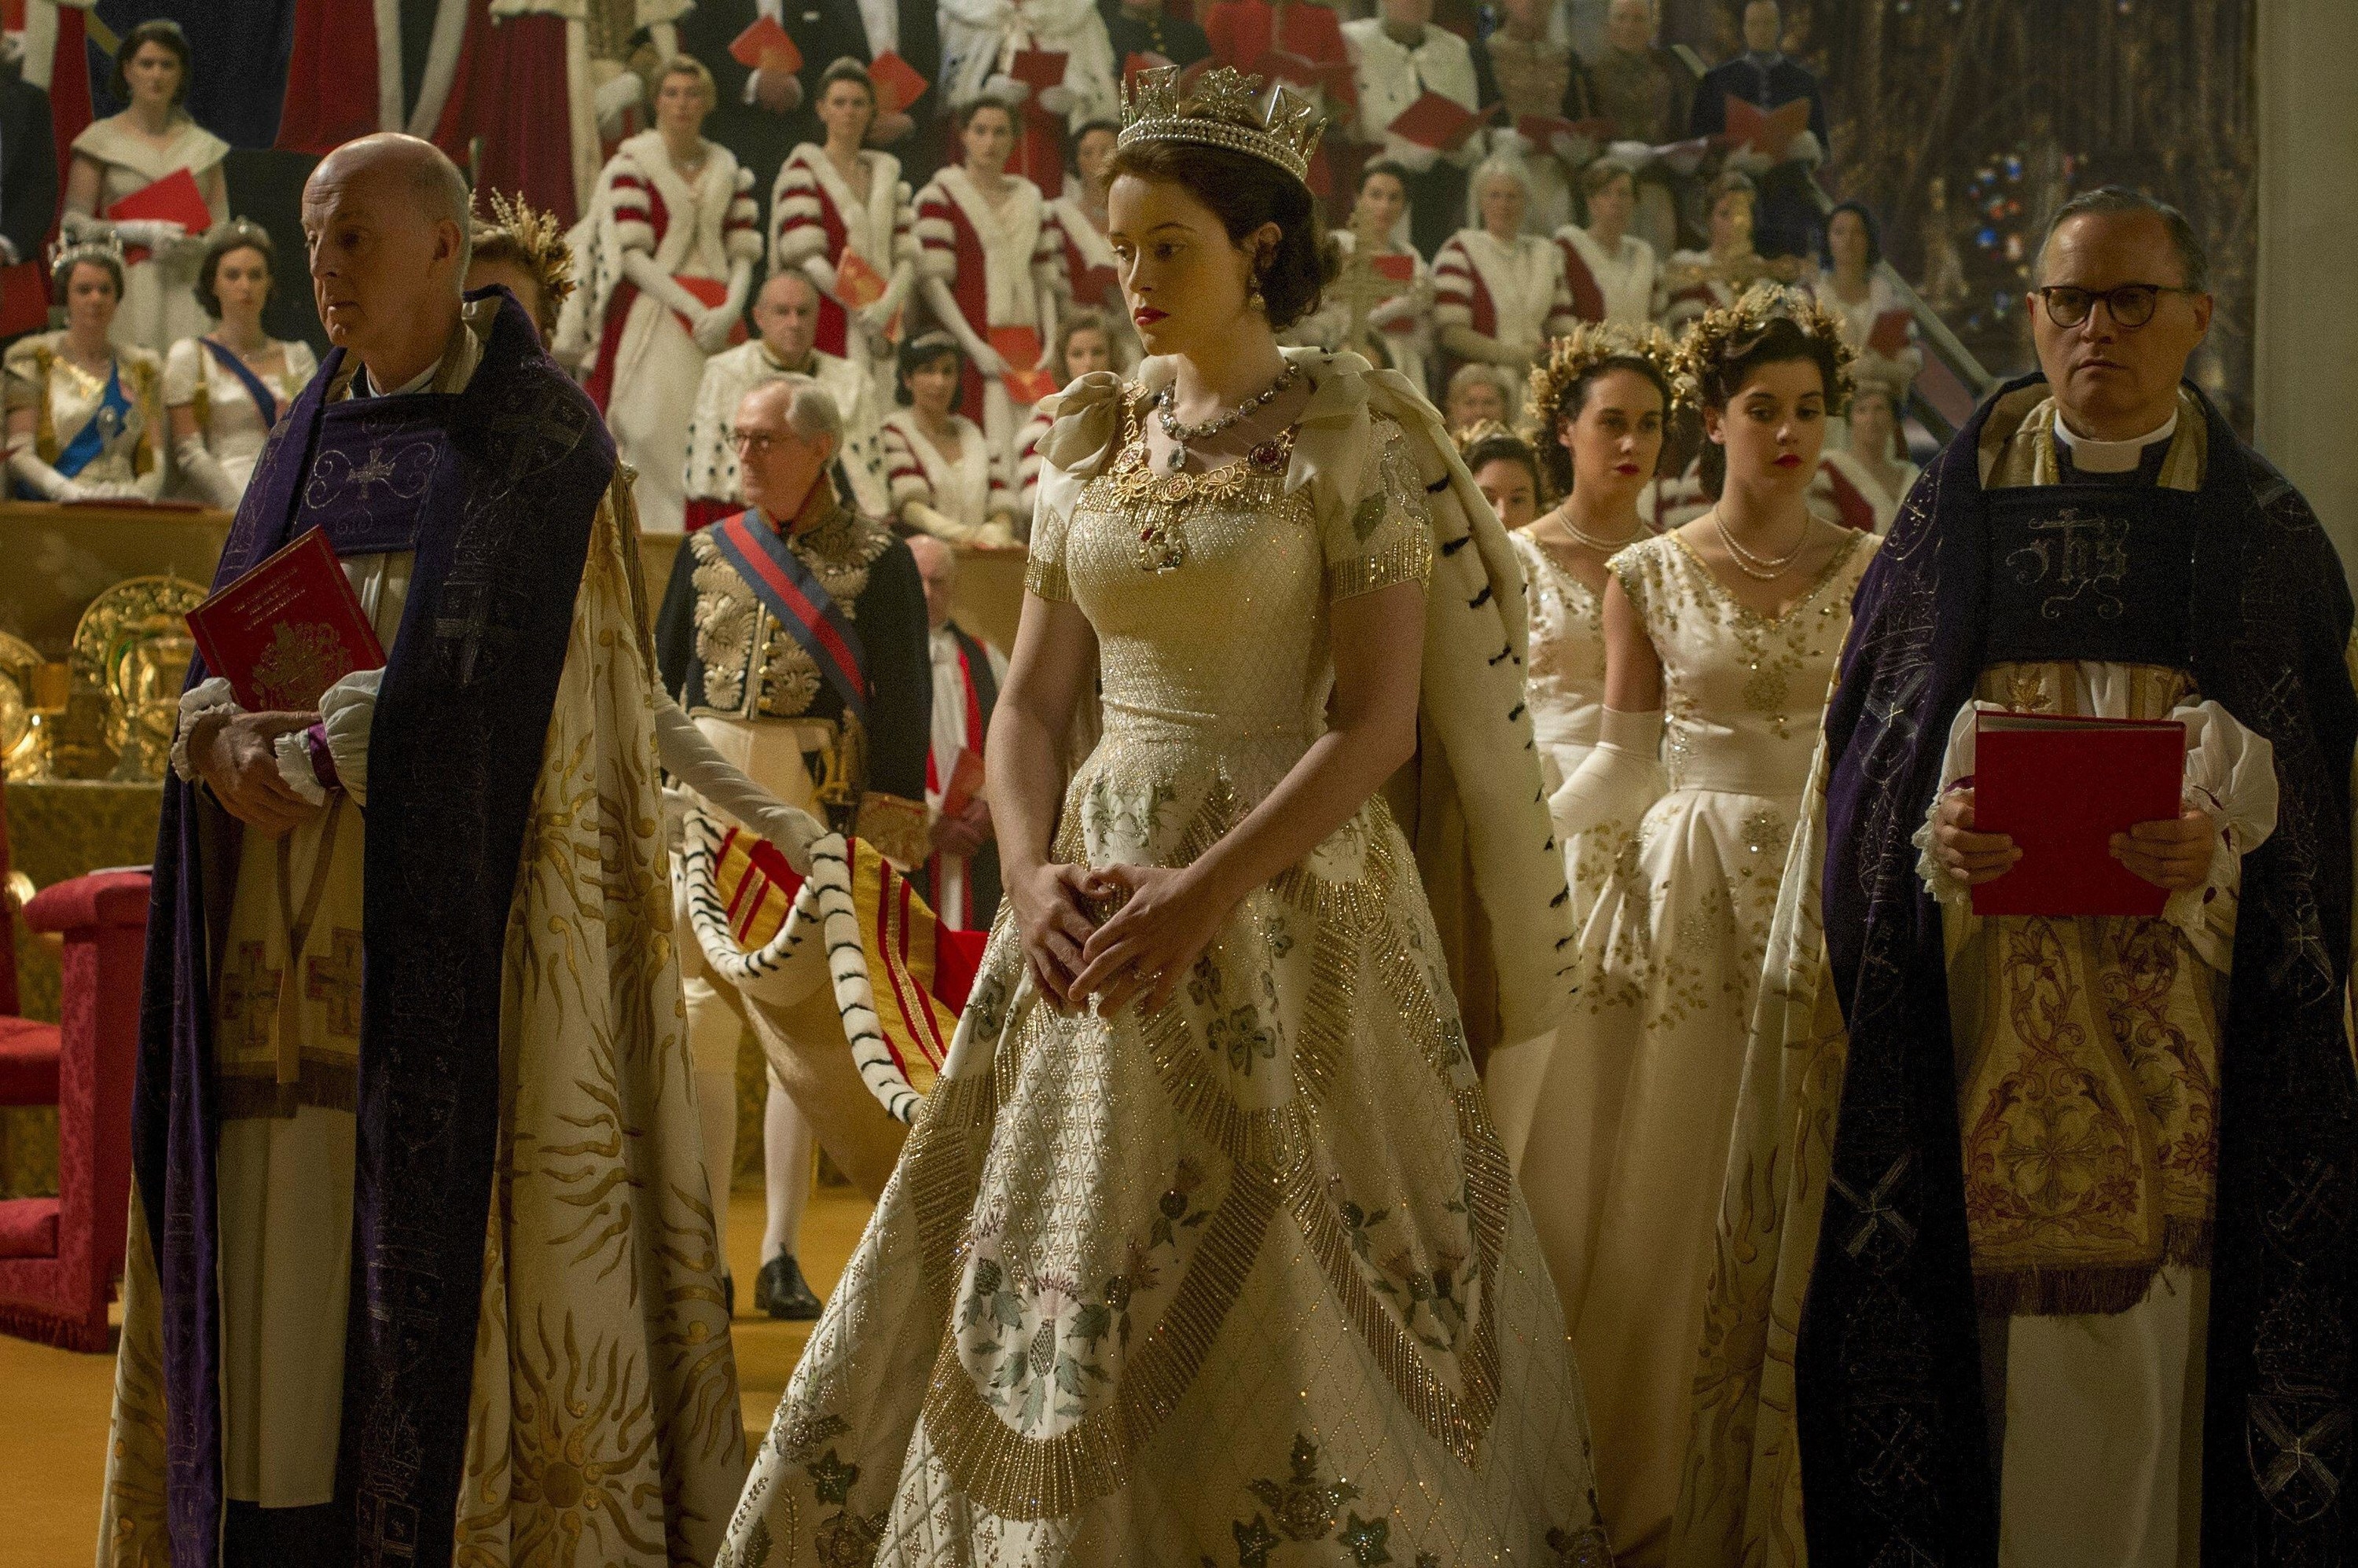 the Queen getting coronated in &quot;The Crown&quot; wearing an ornate sequined gown